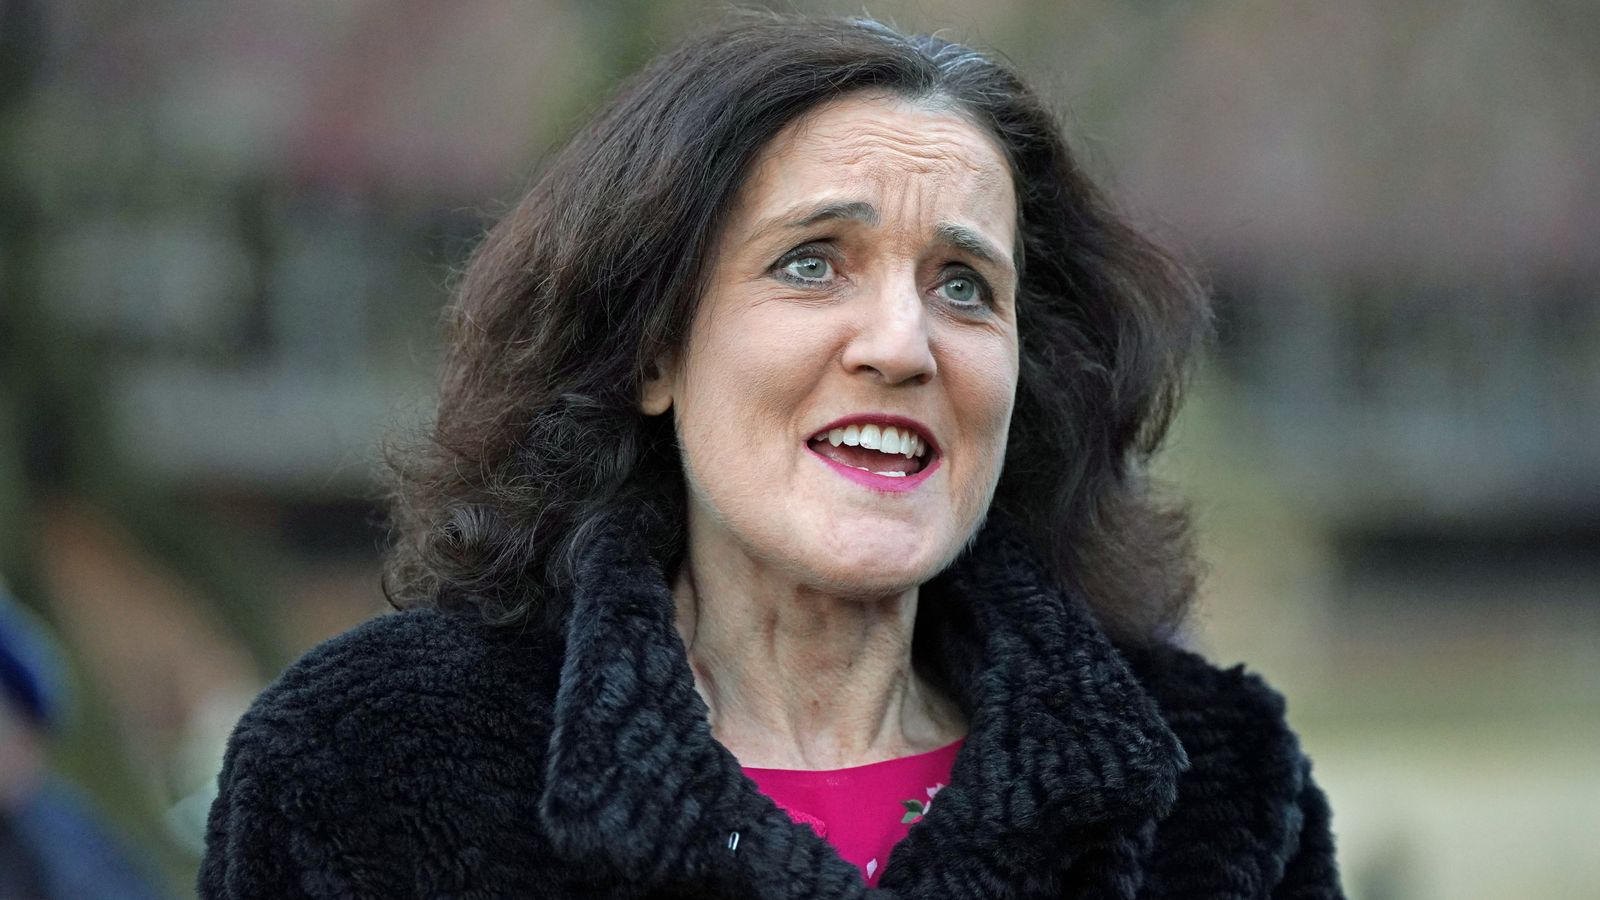 Theresa Villiers: MP failed to declare she owned Shell shares worth £70,000 while working as environment secretary